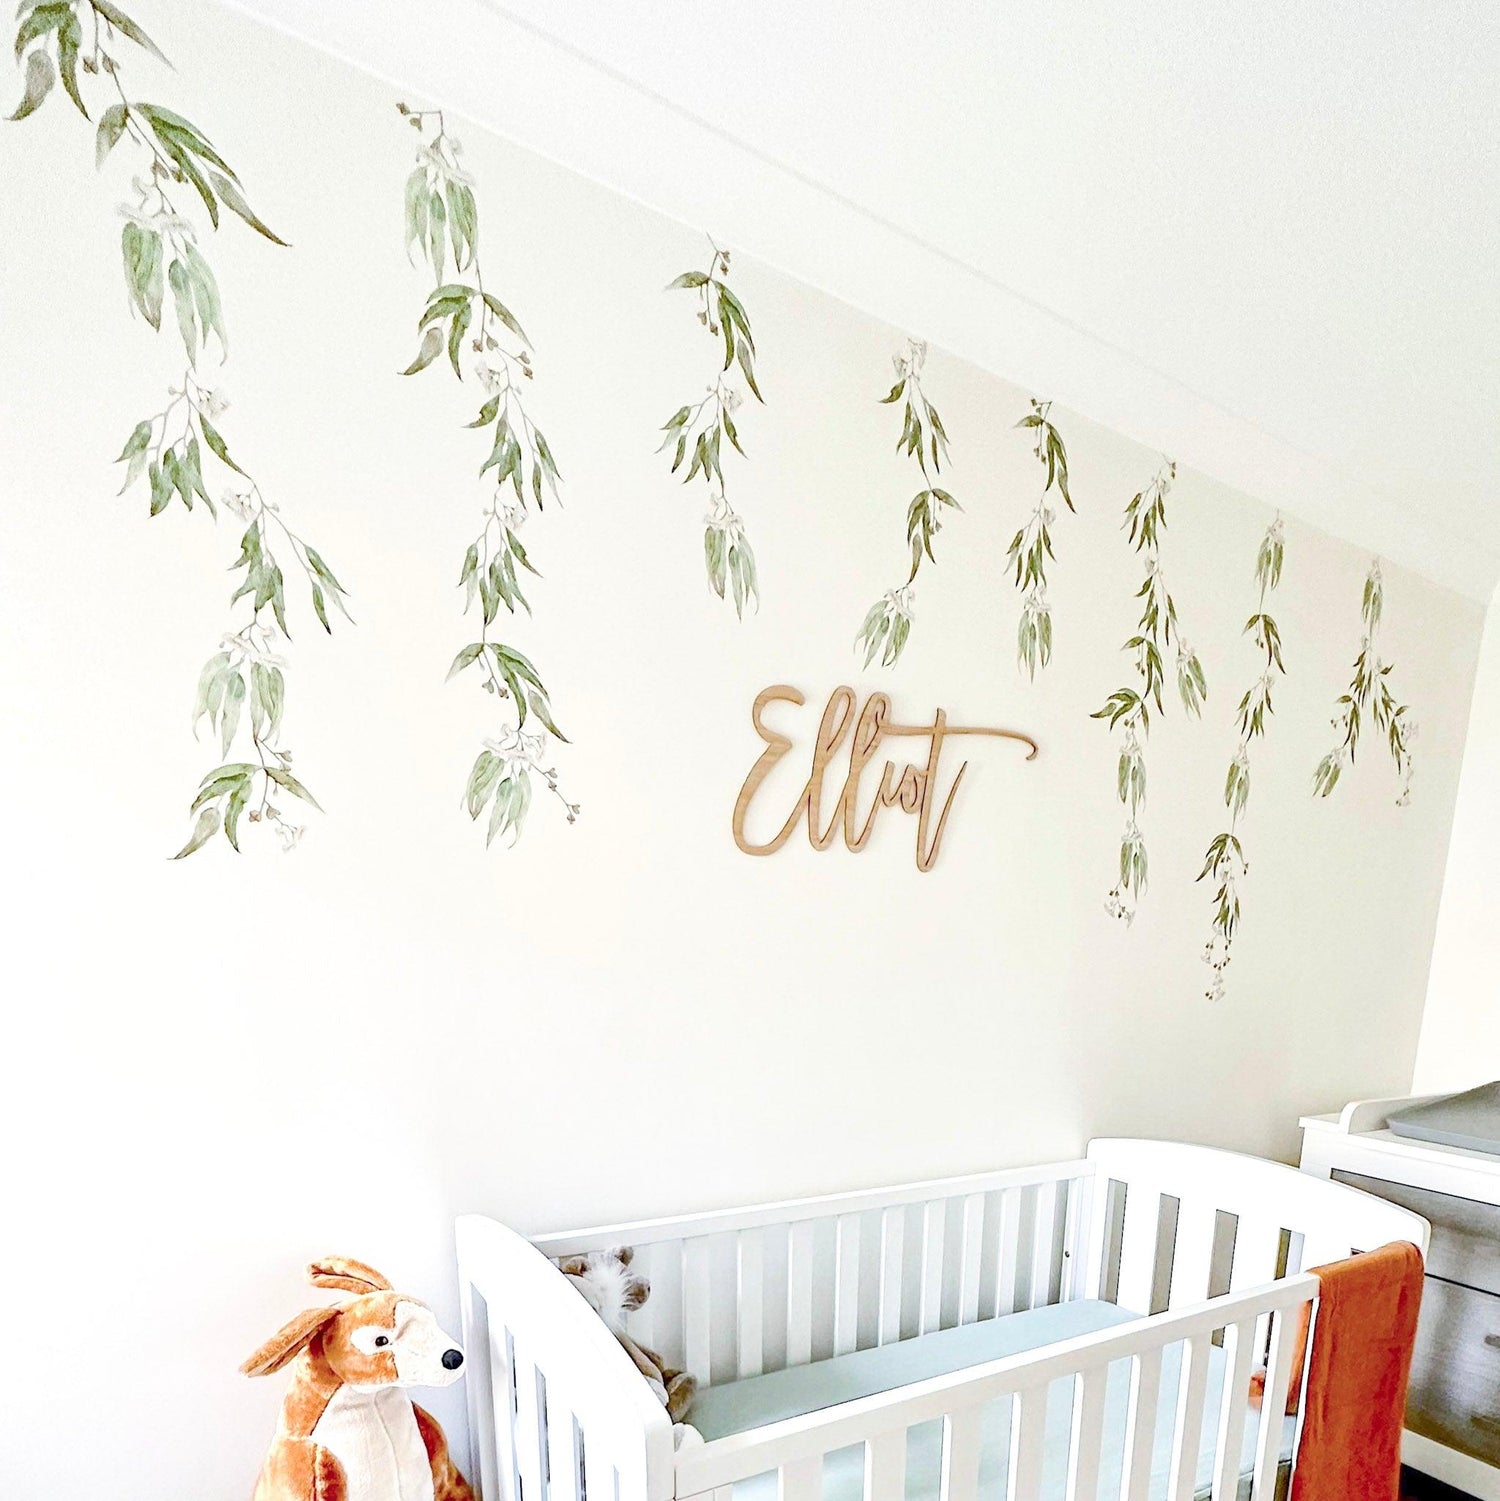 Gum Leaf Branches For an Australiana-themed Nursery - Wall Stickers - lovefrankieart